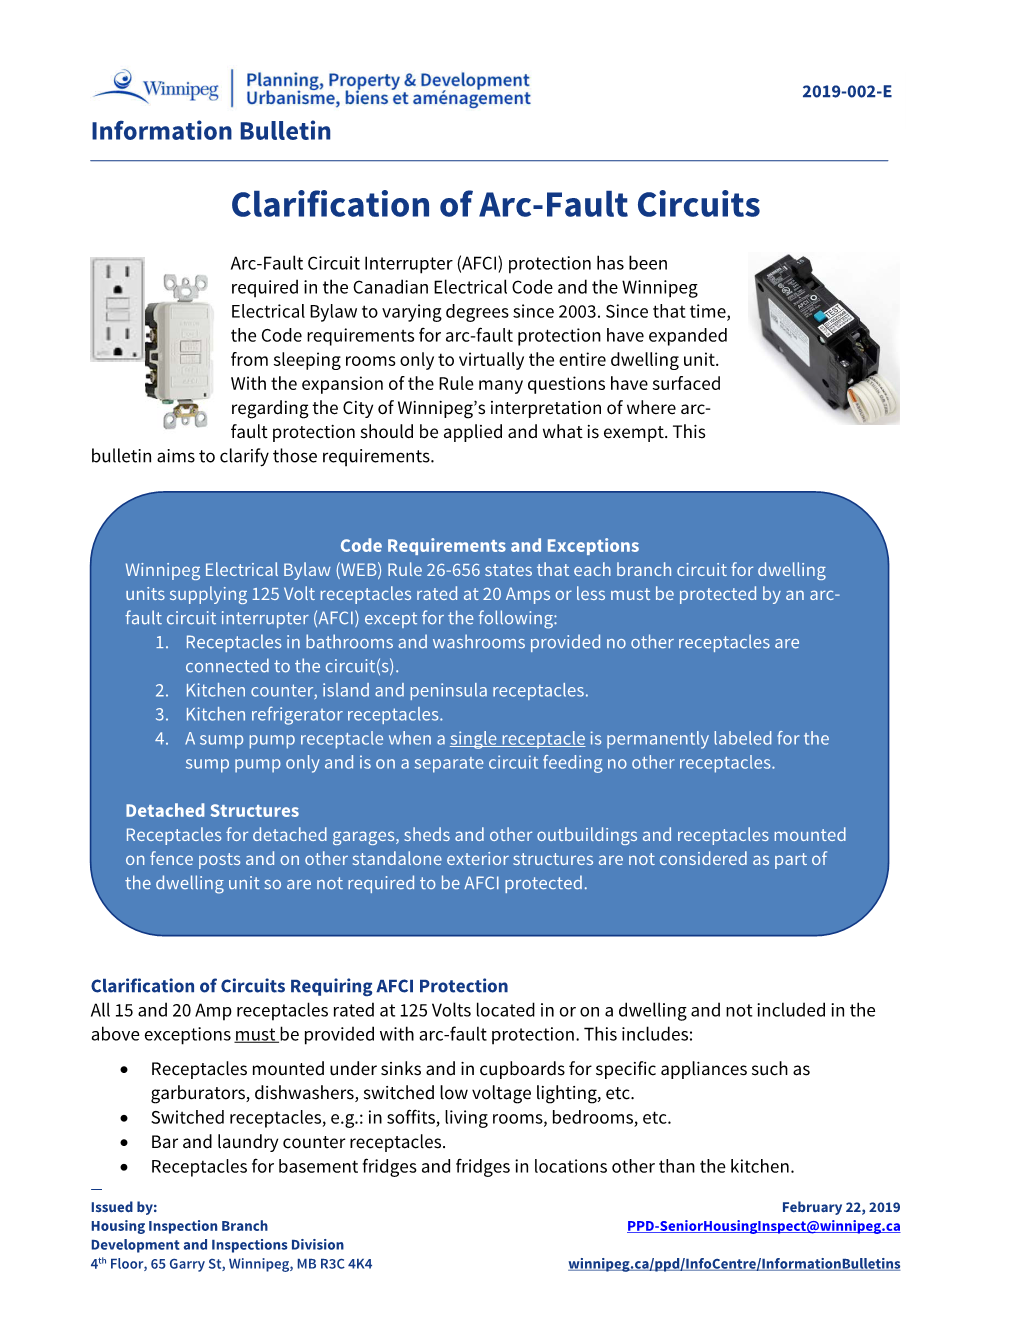 Cow Clarification of Arc Fault Circuits